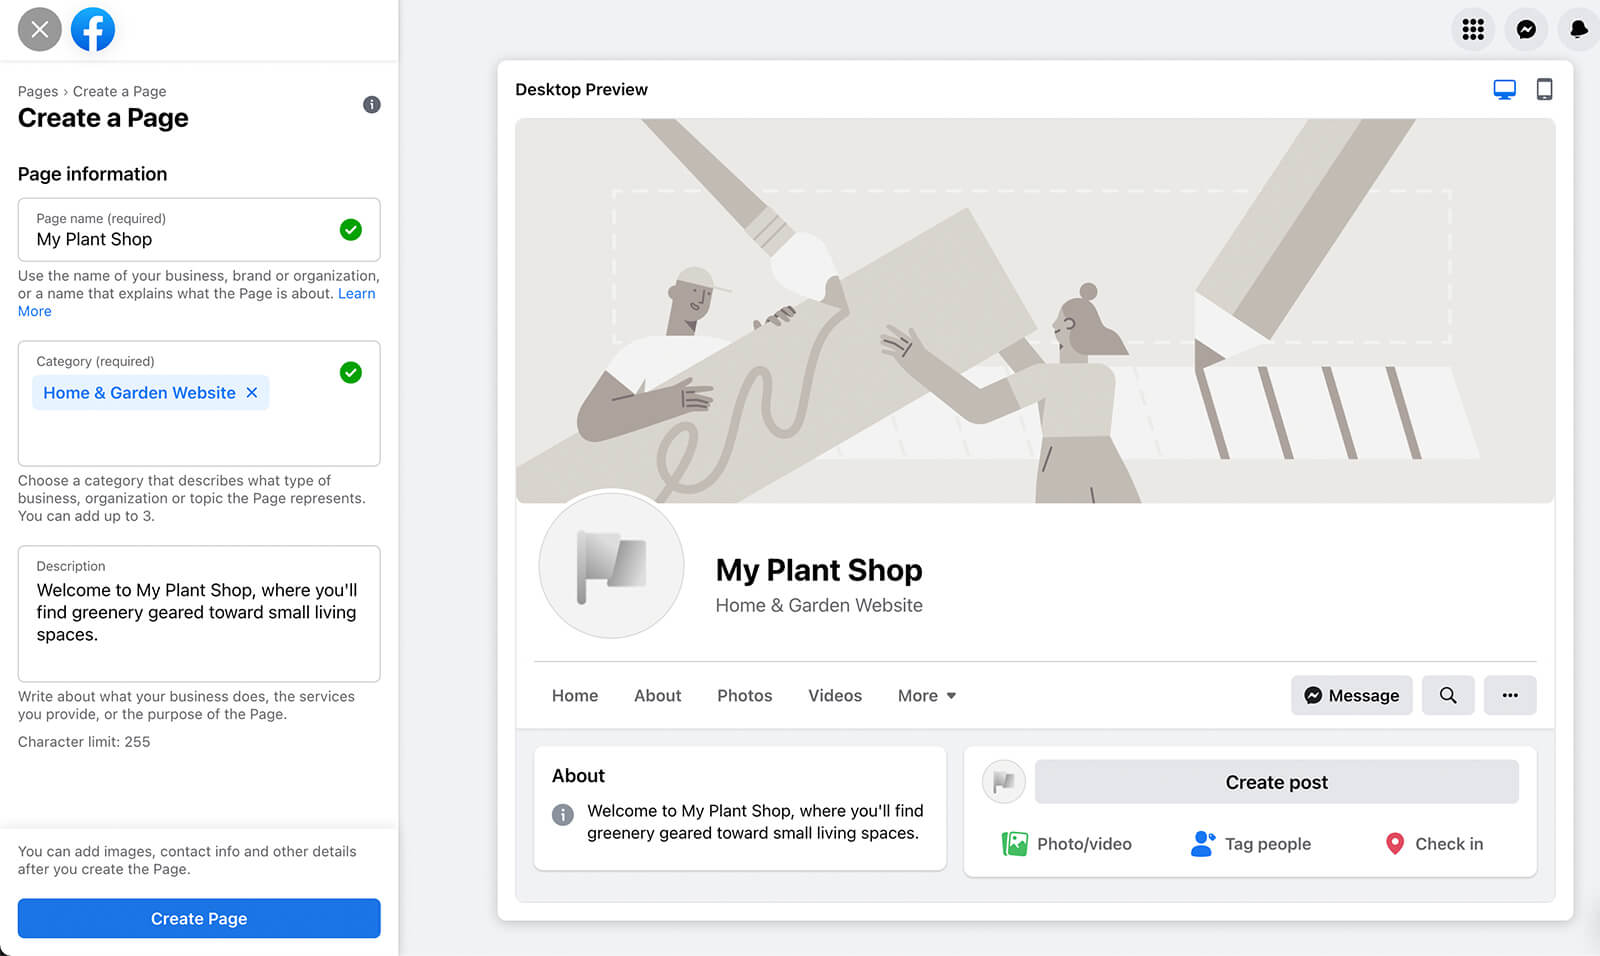 How to Create a Facebook Business Page The Complete Guide for 2022